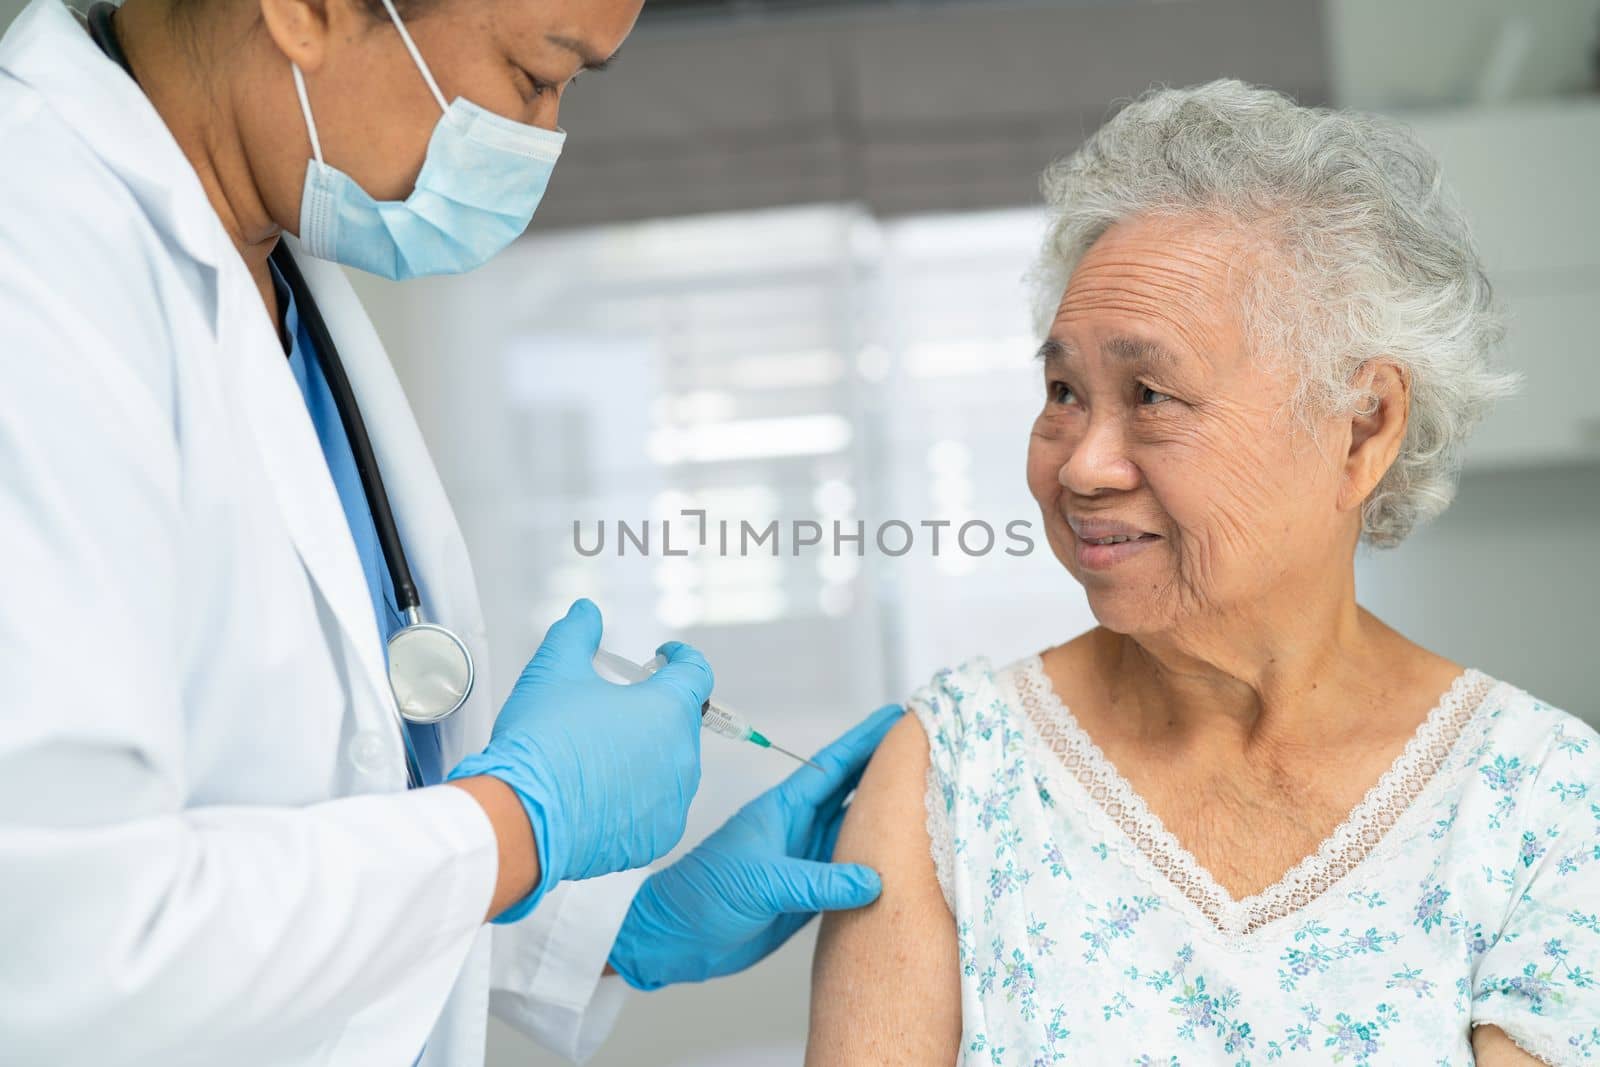 Elderly Asian senior woman wearing face mask getting covid19 or coronavirus vaccine by doctor make injection.